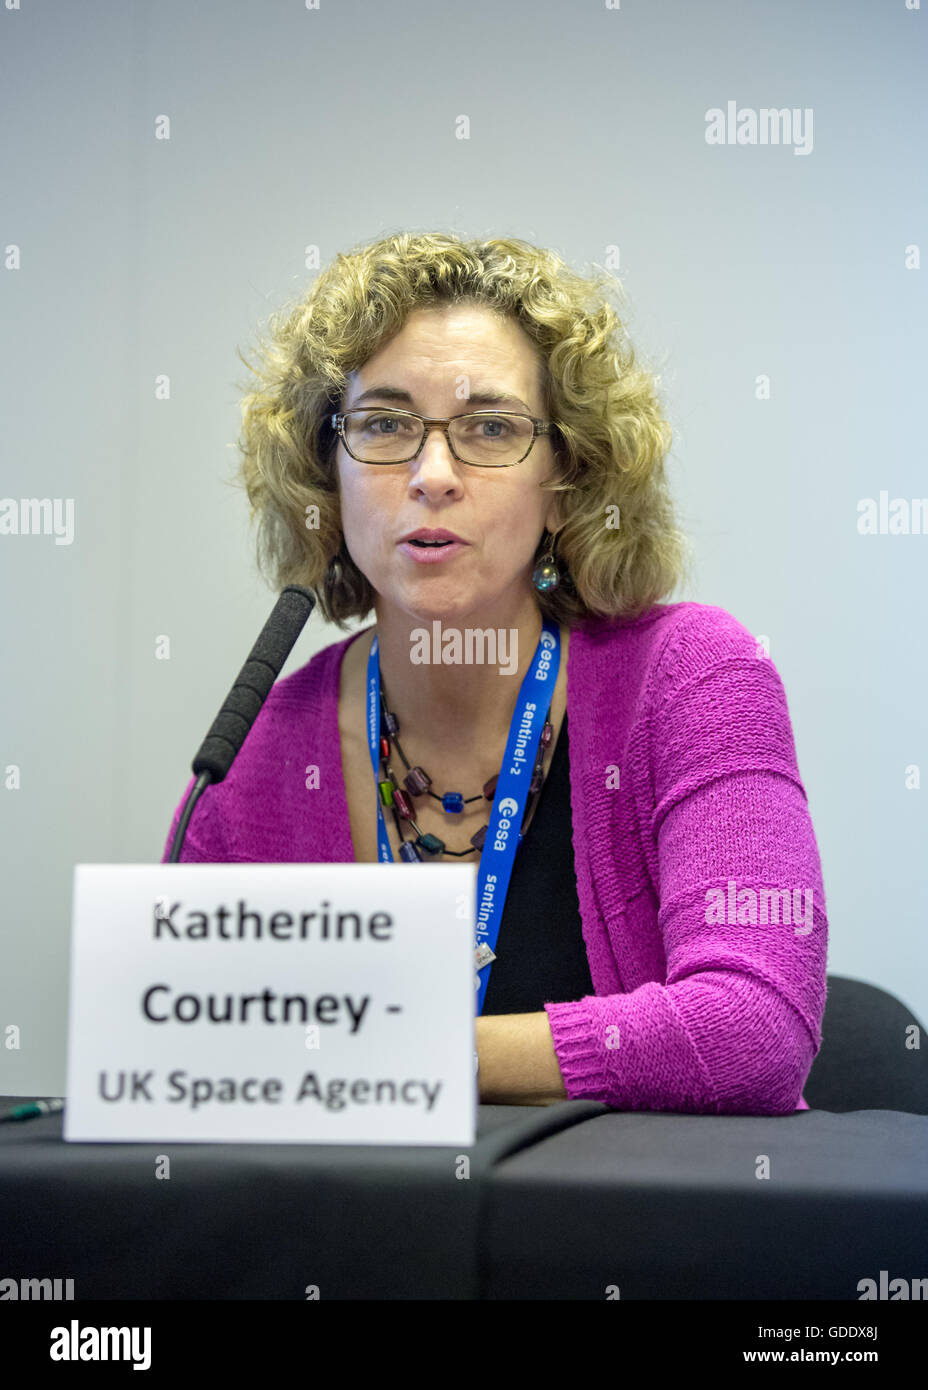 Farnborough, Hampshire UK. 15th July 2016. Katherine Courtney from the US Space Agency speaks at a press conference. Stock Photo